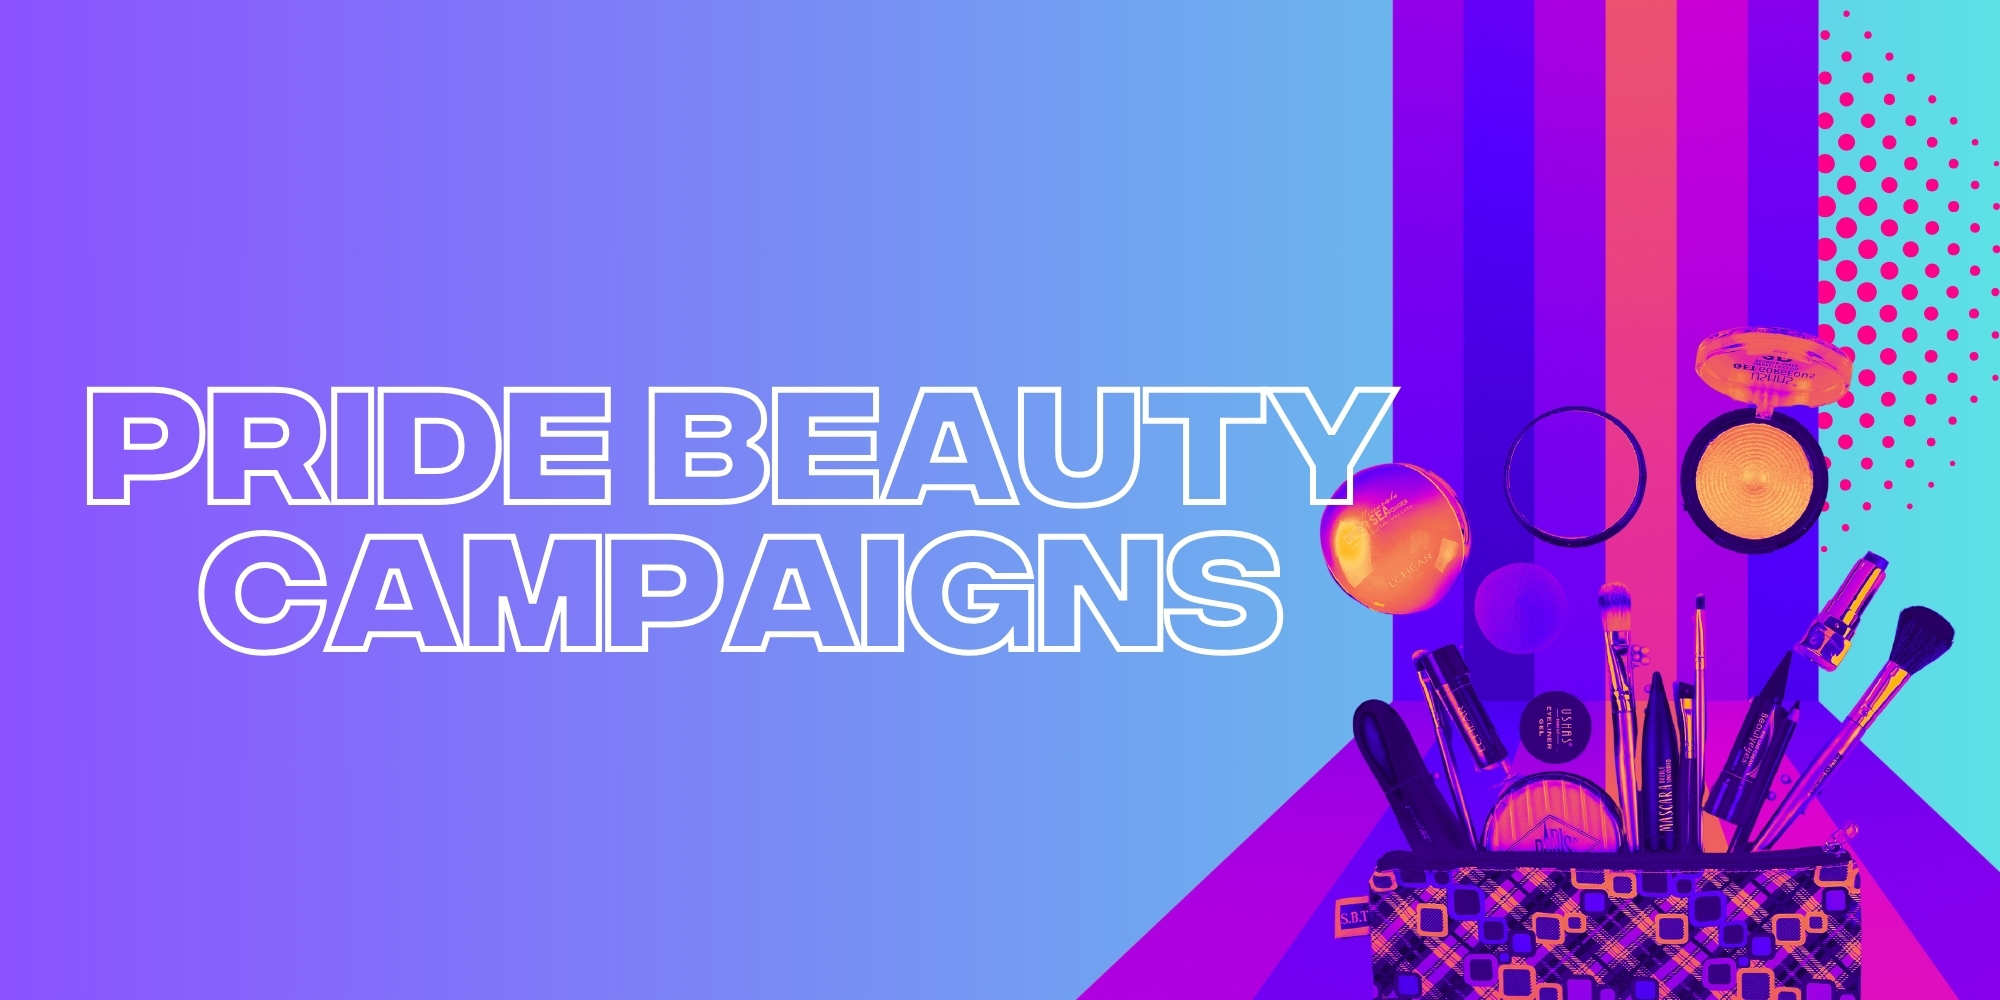 These Are The Beauty Brands Celebrating Pride The Right Way